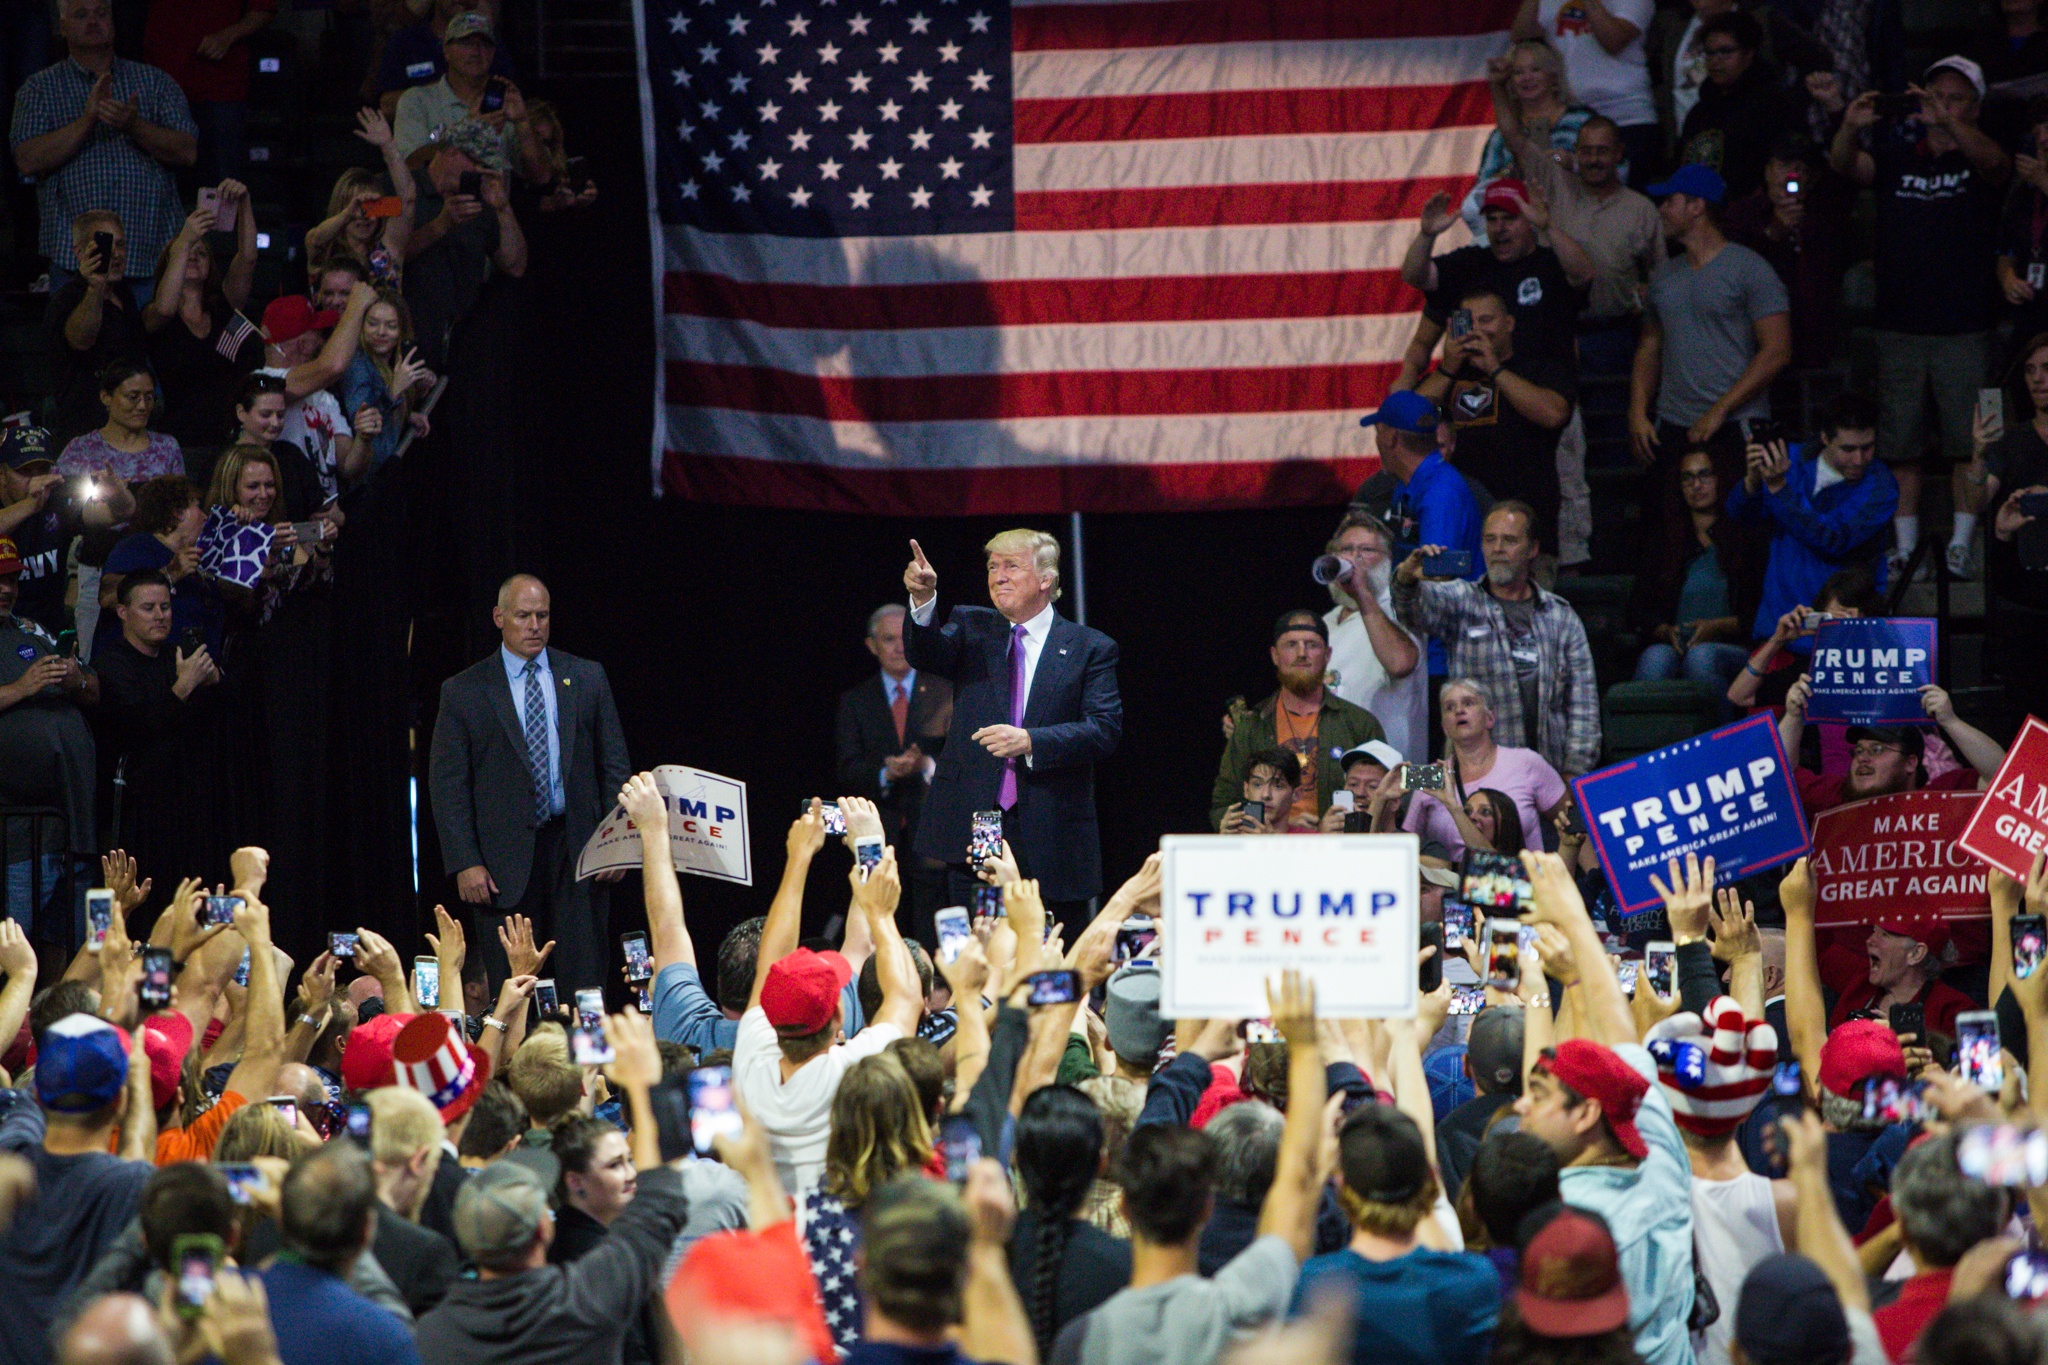 Republican presidential nominee Donald Trump makes his entrance during a rally at the Xfinity Arena in Everett on Tuesday. (Daniella Beccaria / For The Herald)